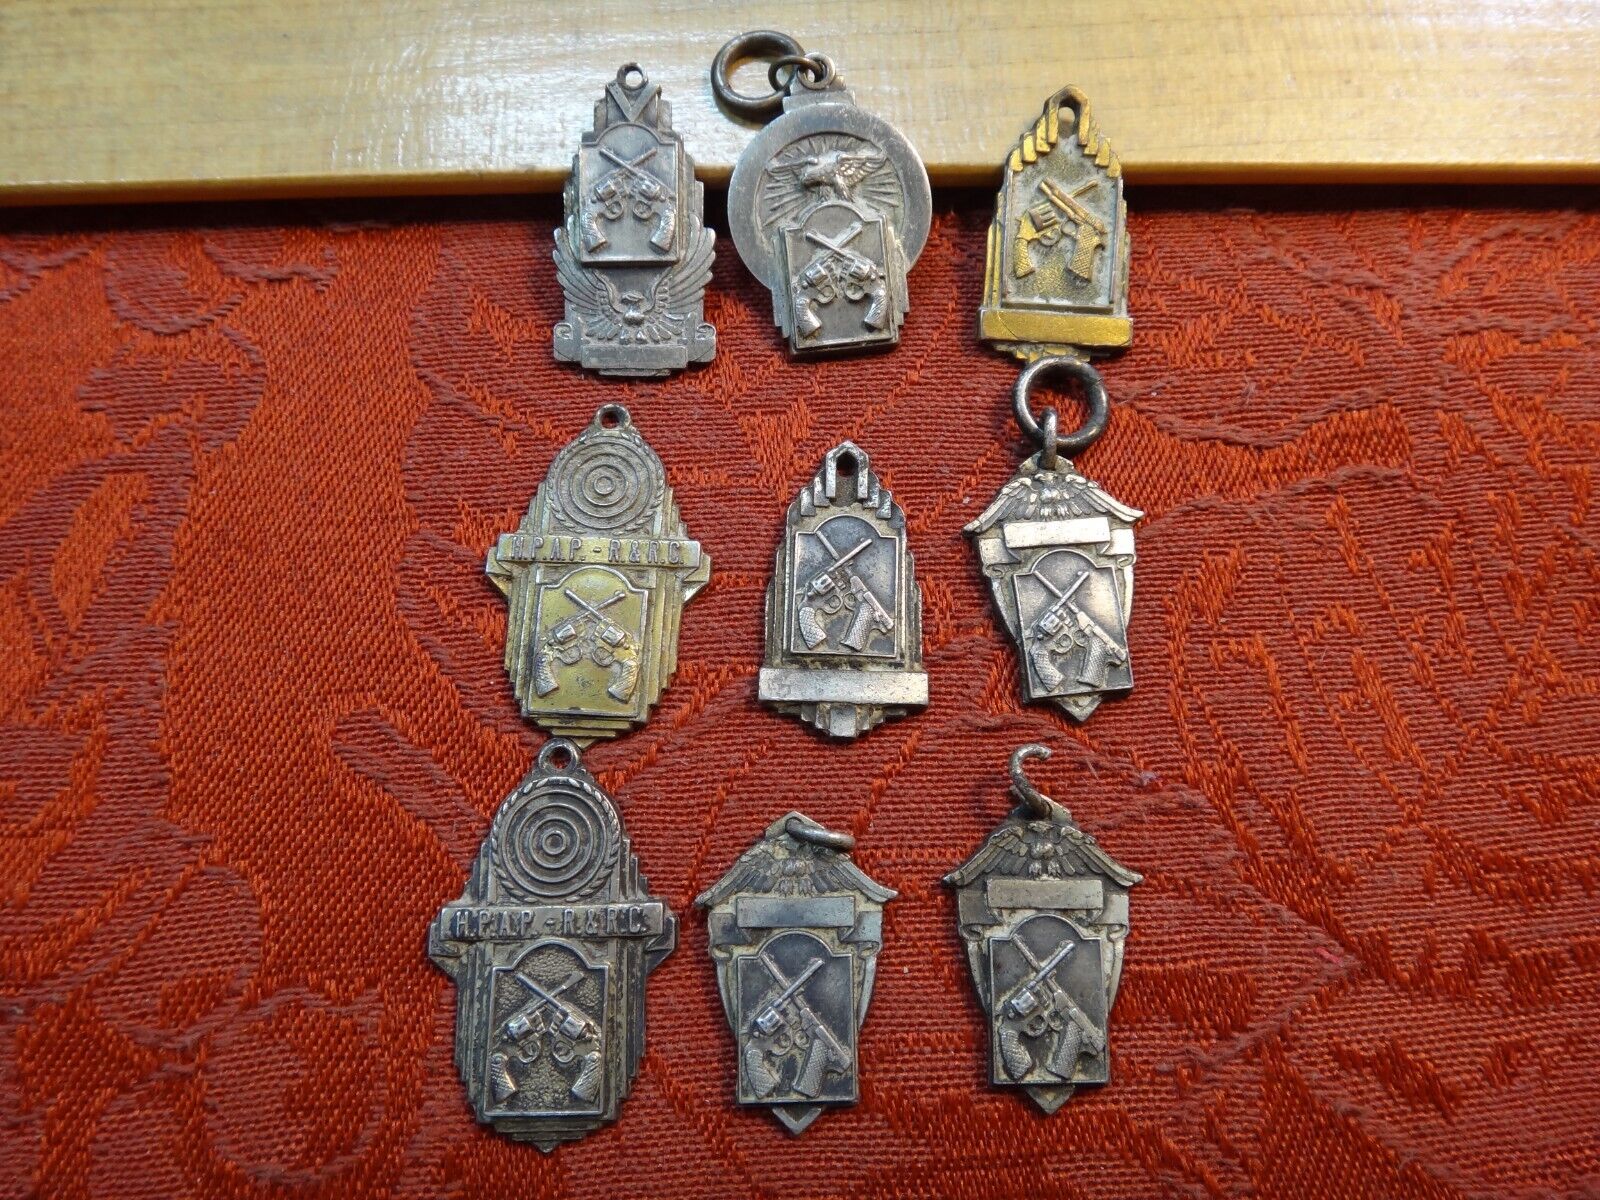 Lot of 9 Sterling Silver Shooting Medals Pendants (58 Grams) - Free S&H USA